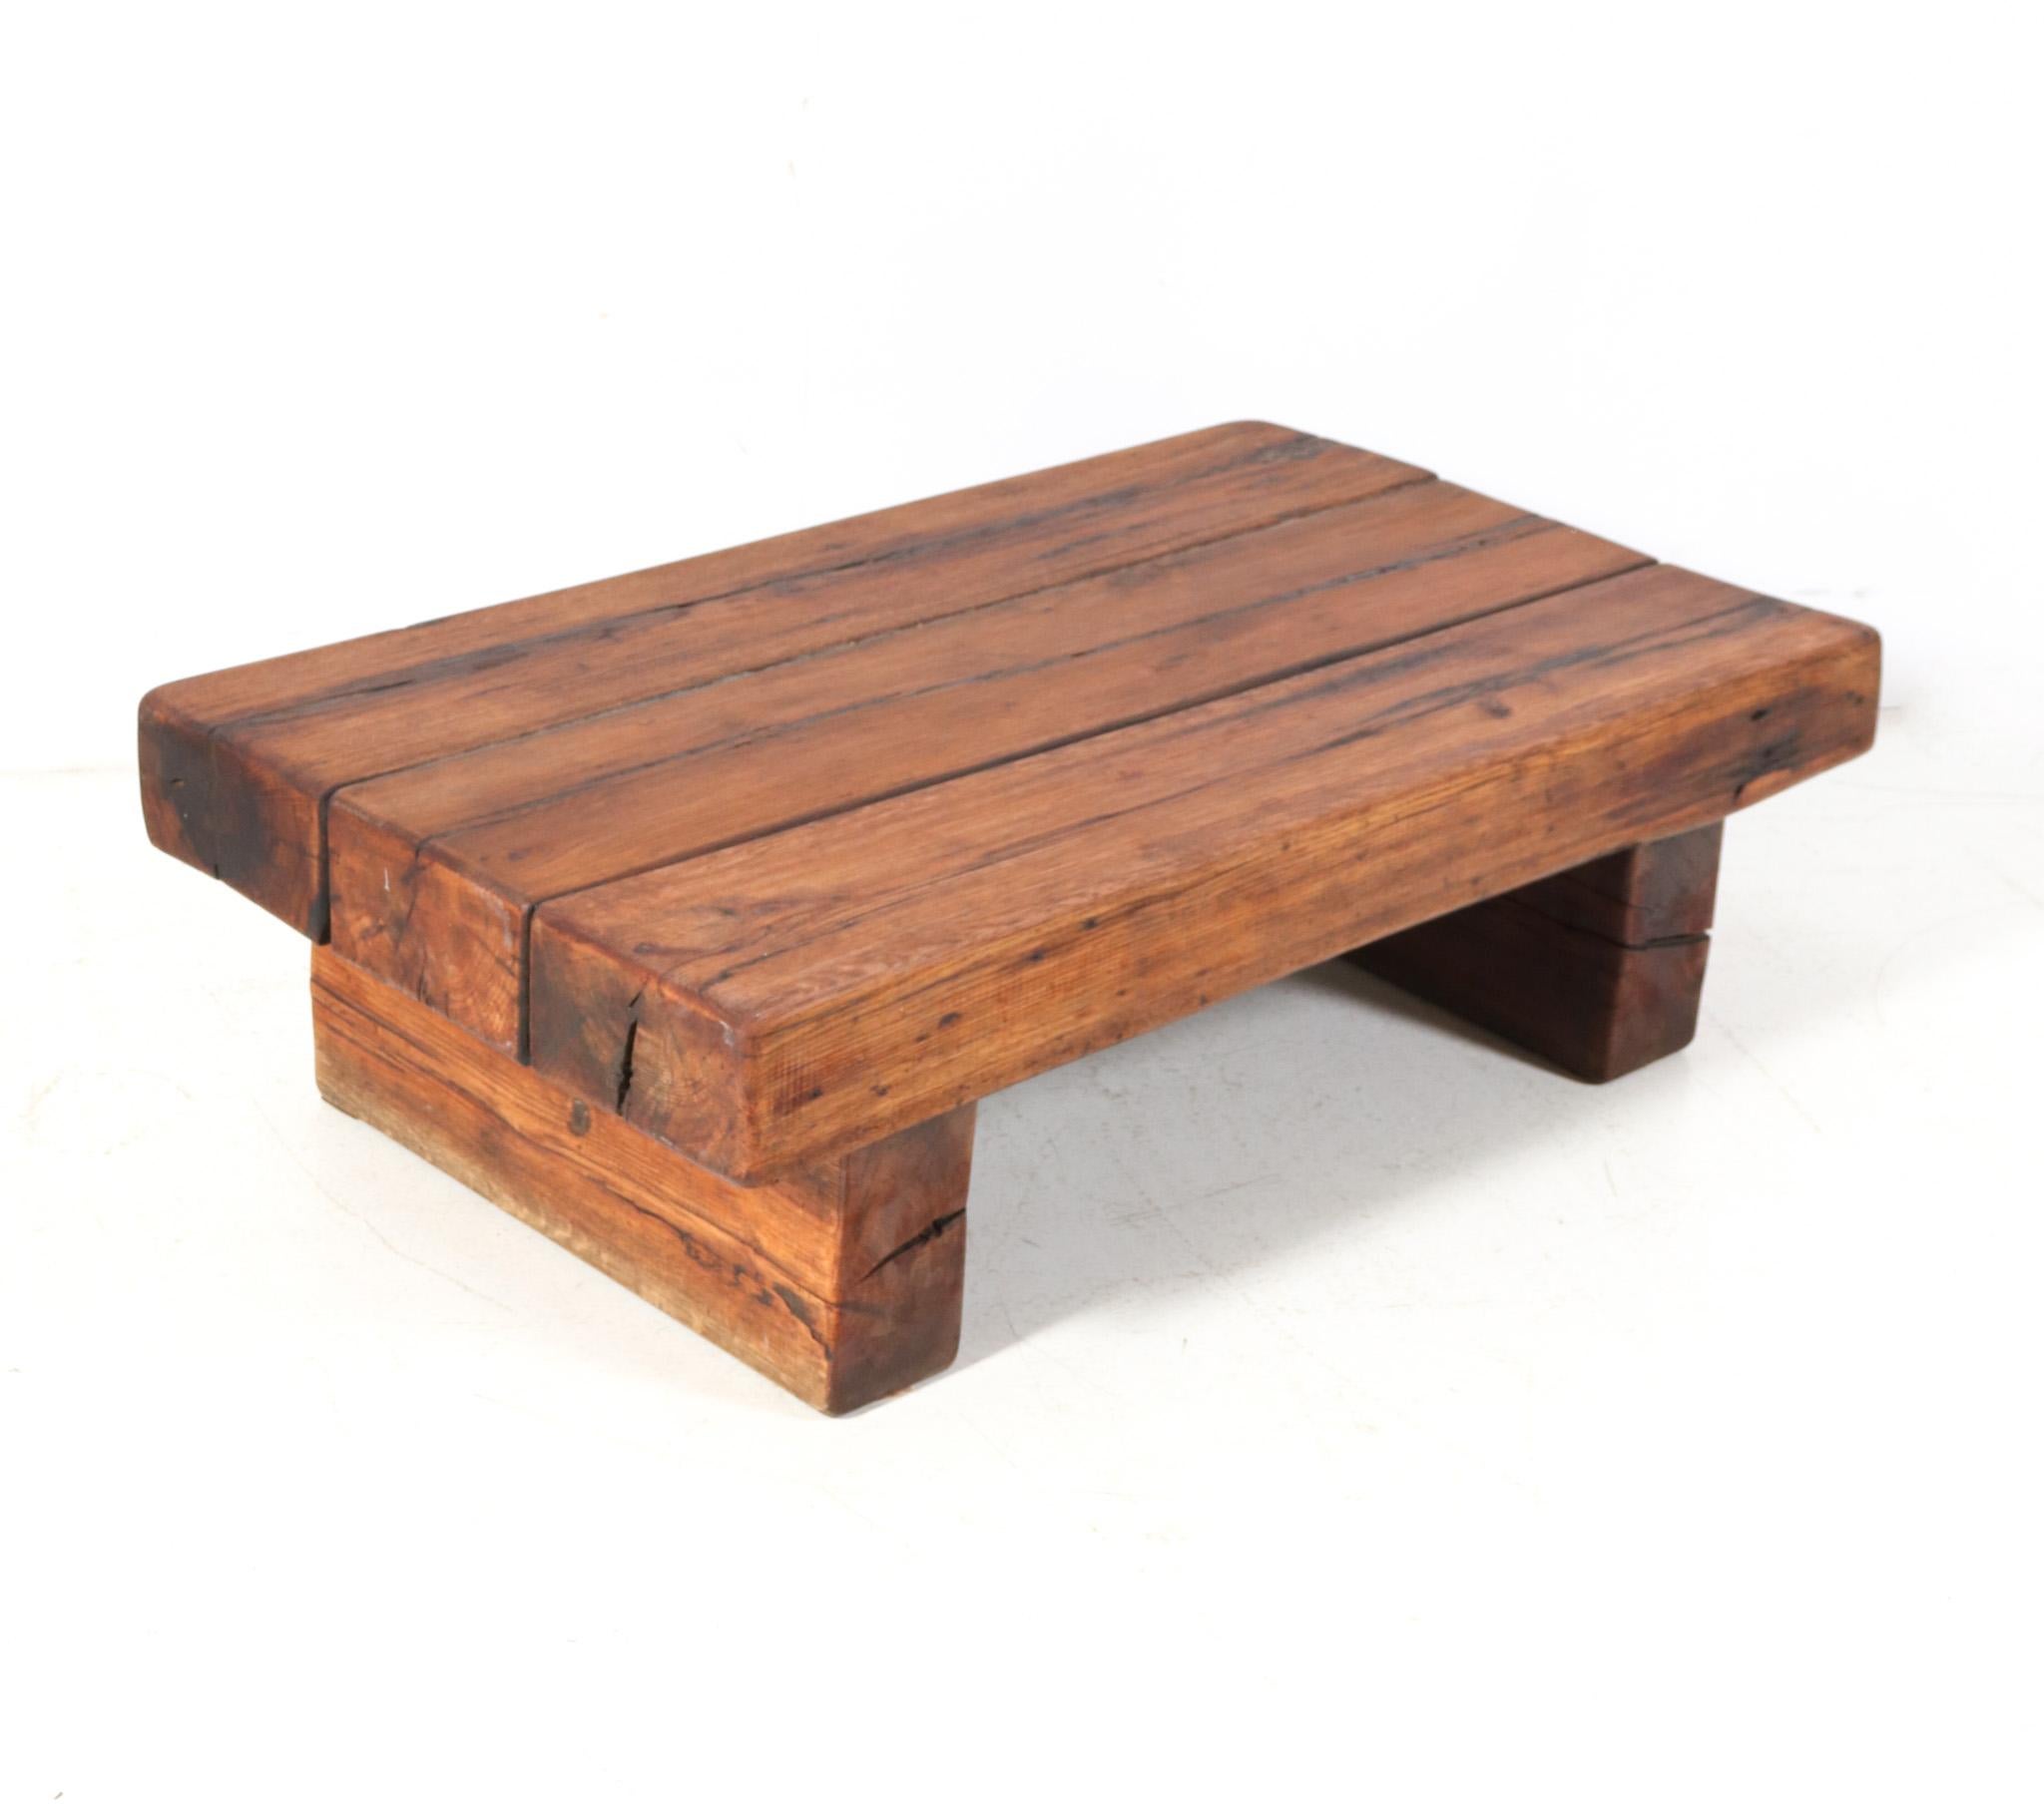 Mid-20th Century Oak Brutalist Rustic Coffee Table or Cocktail Table, 1960s For Sale